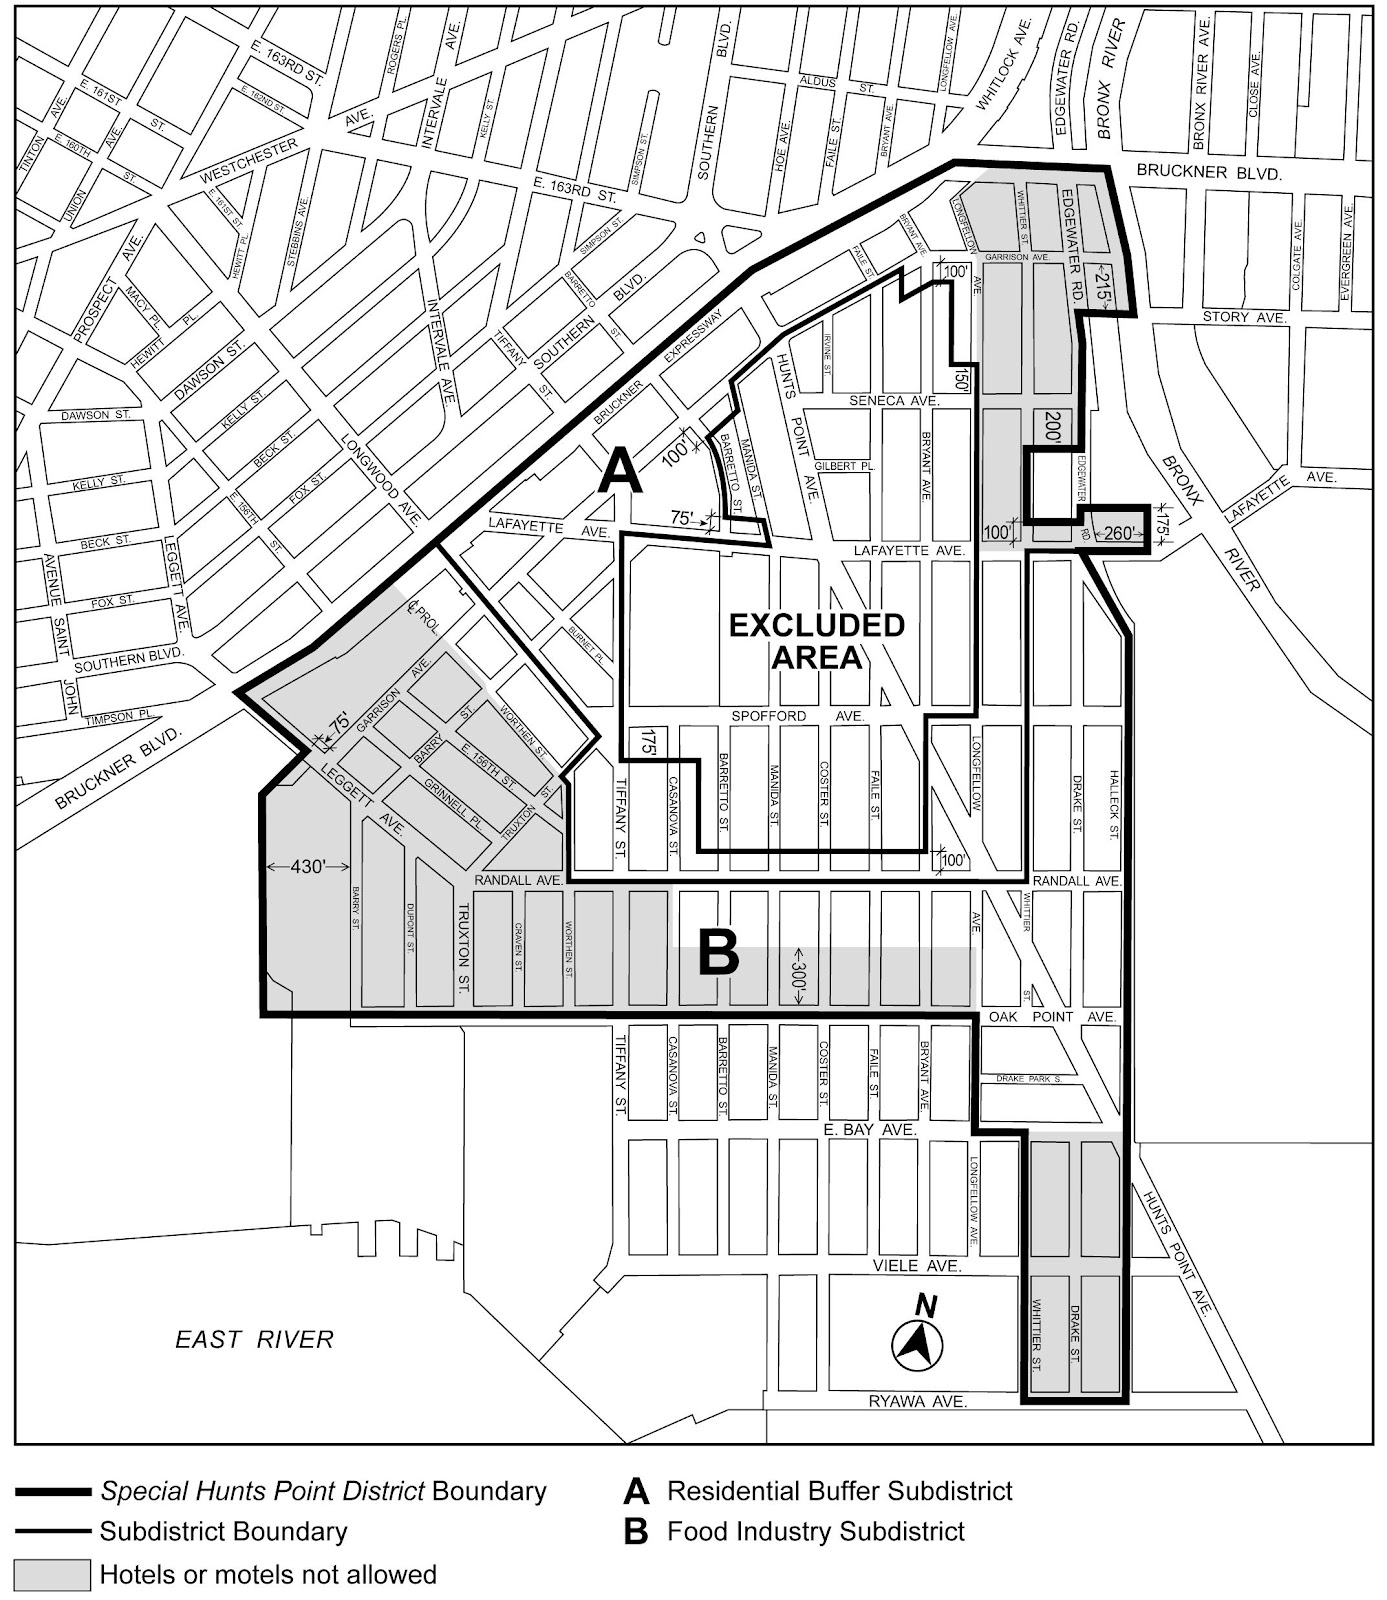 Zoning Resolutions Chapter 8: Special Hunts Point District Appendix A.0